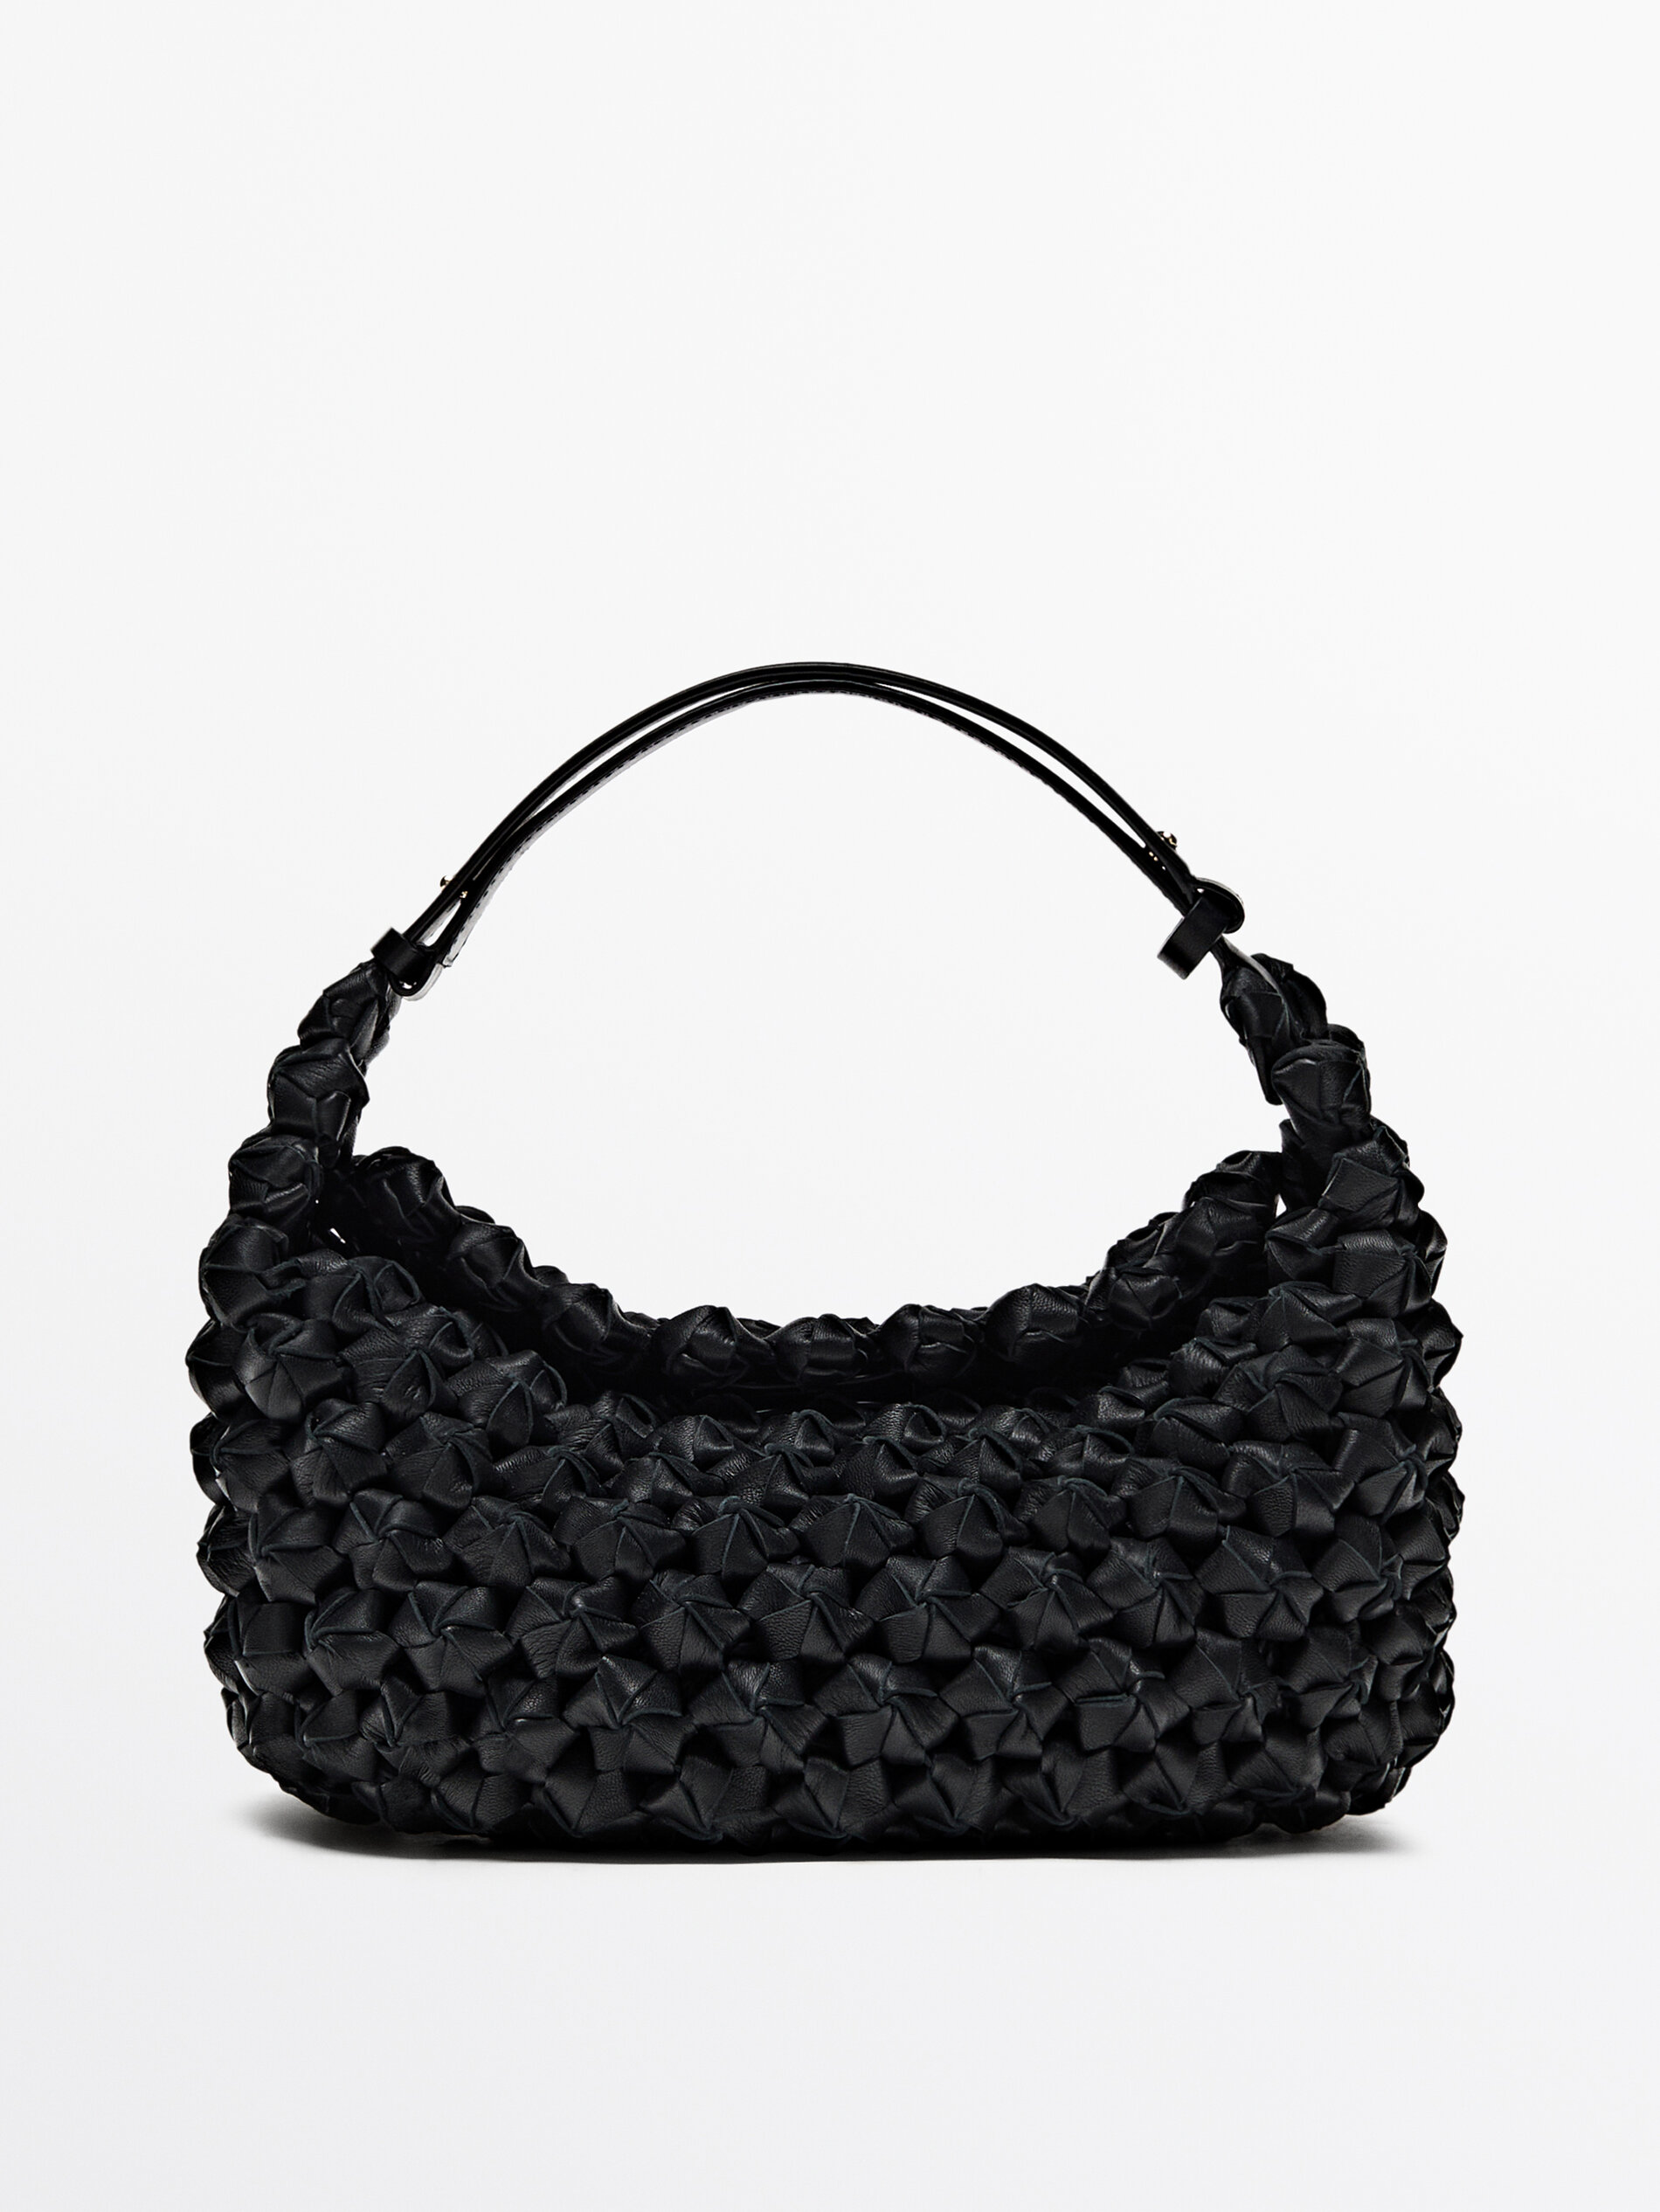 BRAIDED LEATHER BAG - LIMITED EDITION